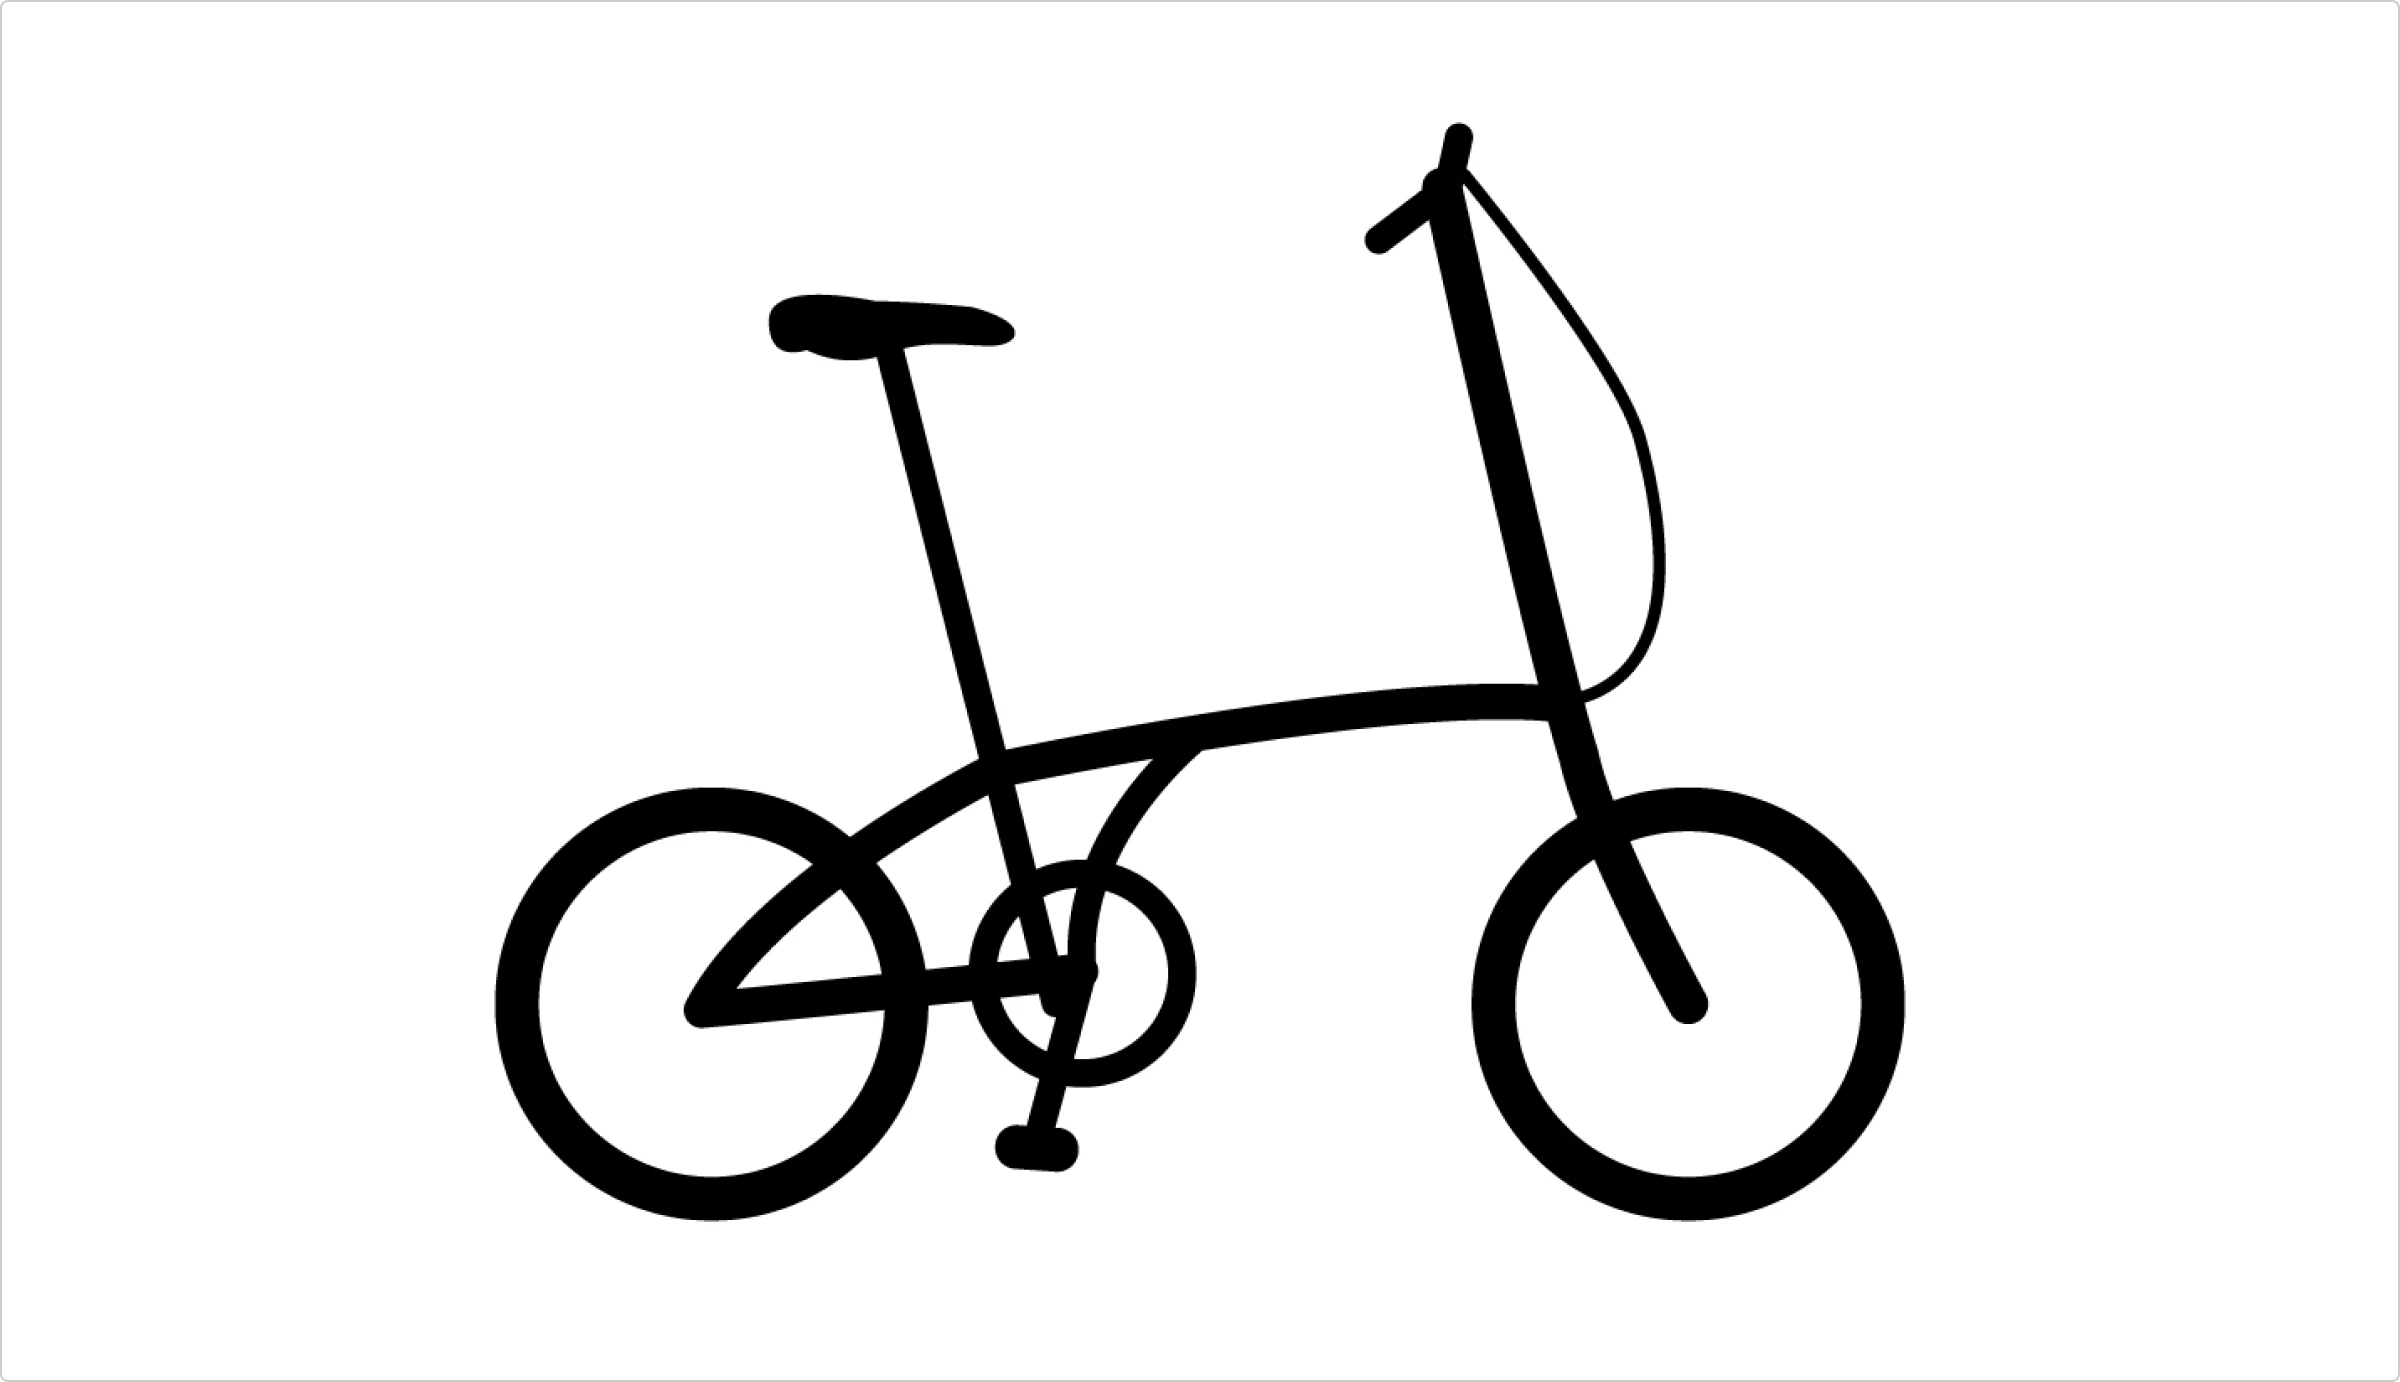 Folding bike resulted icon